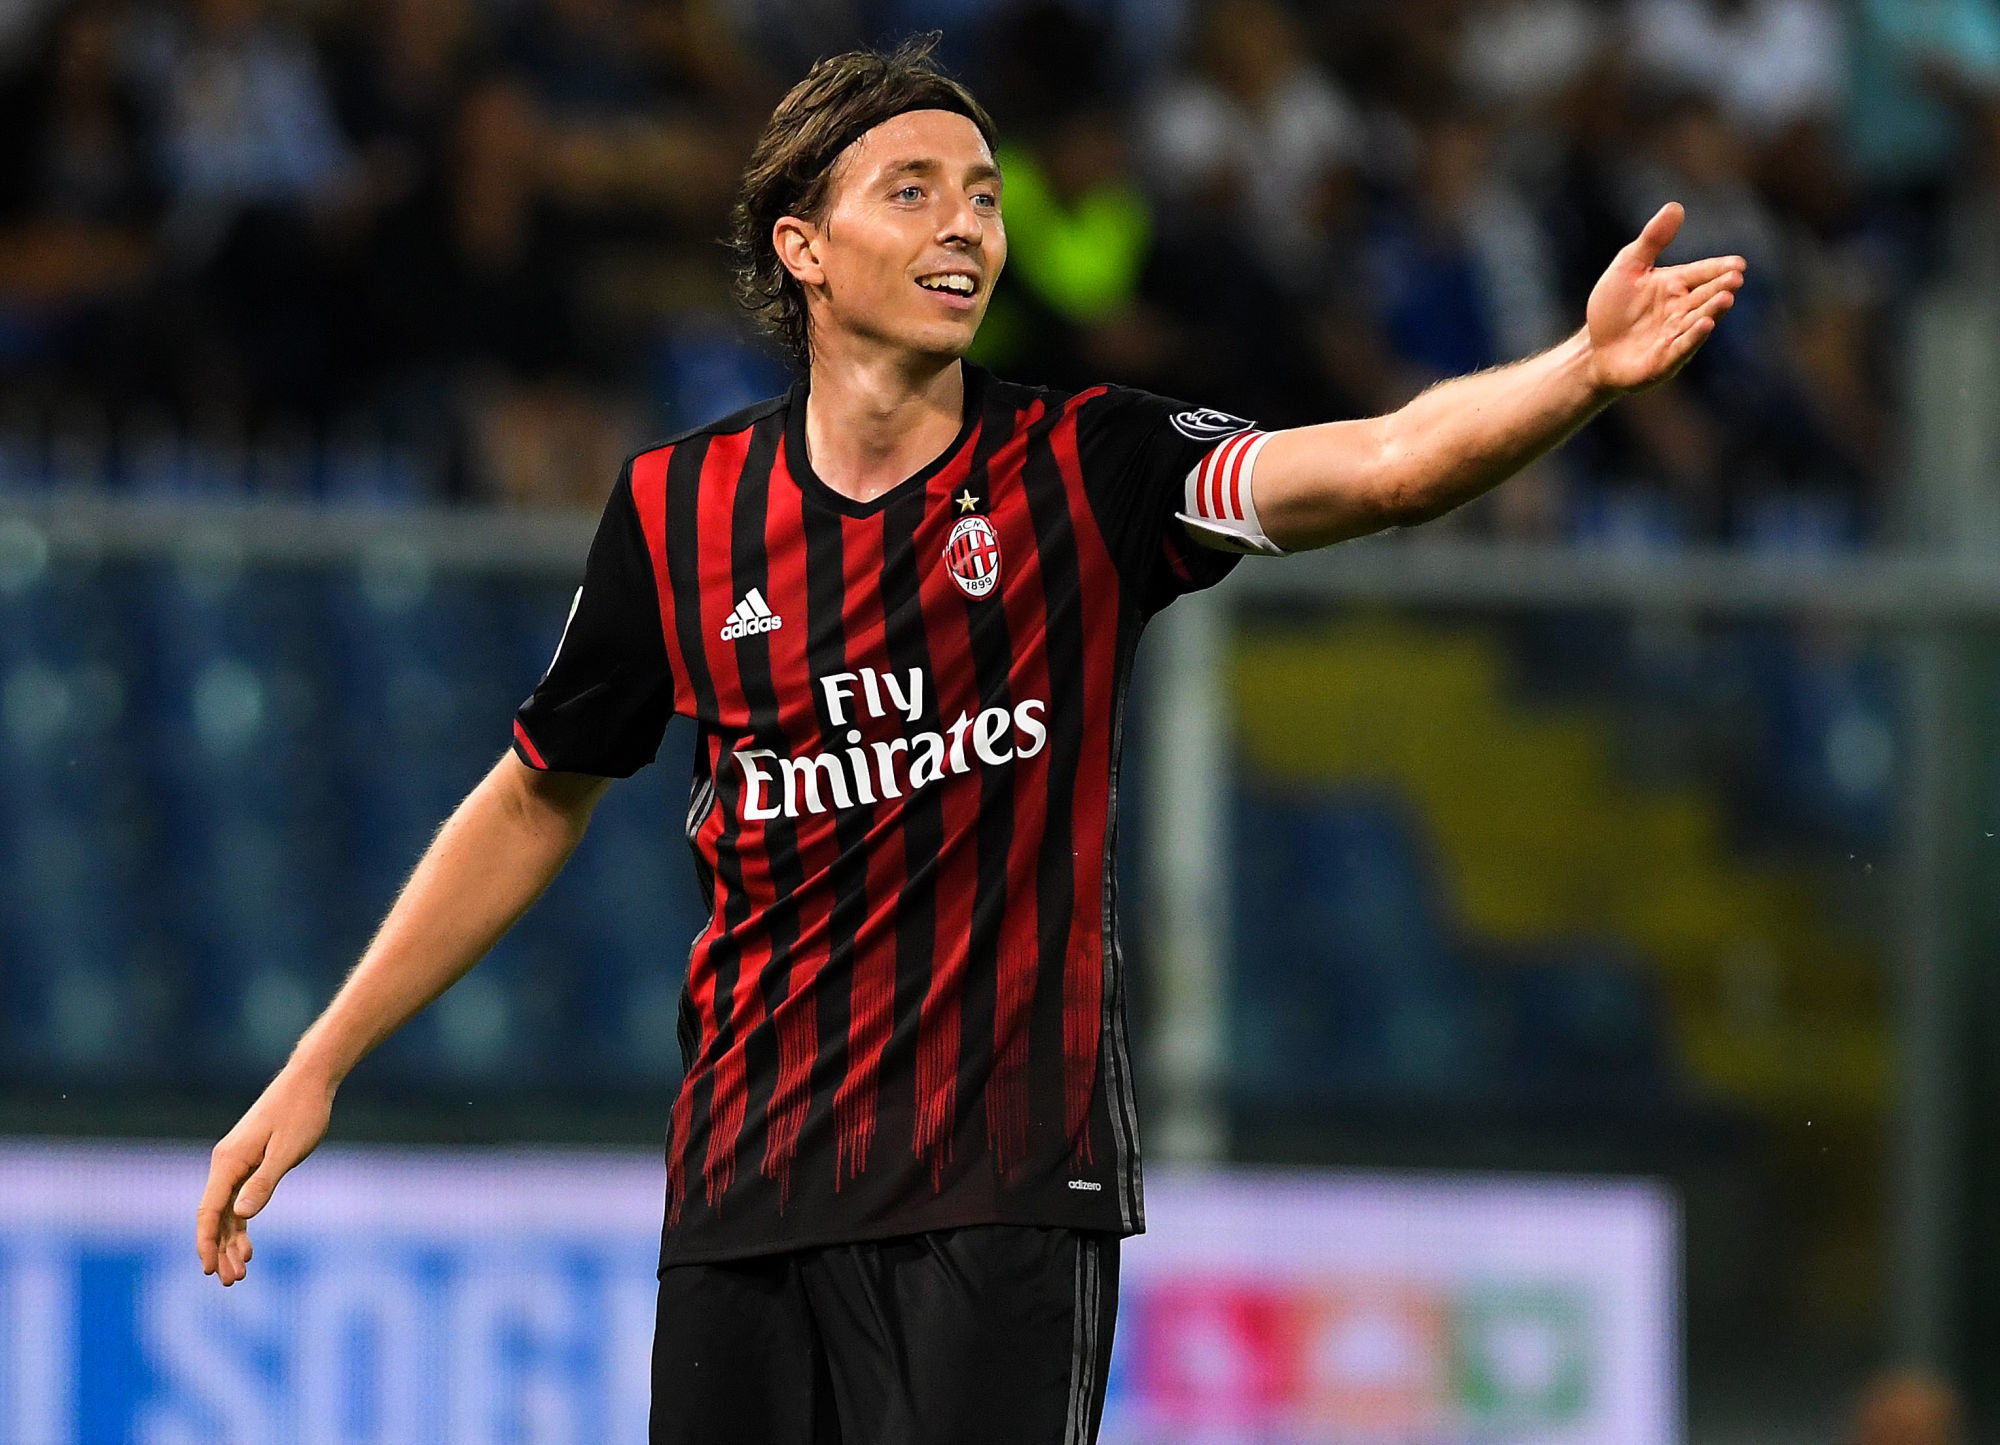 Riccardo Montolivo during the Serie A match between Sampdoria and Milan on 16th September 2016